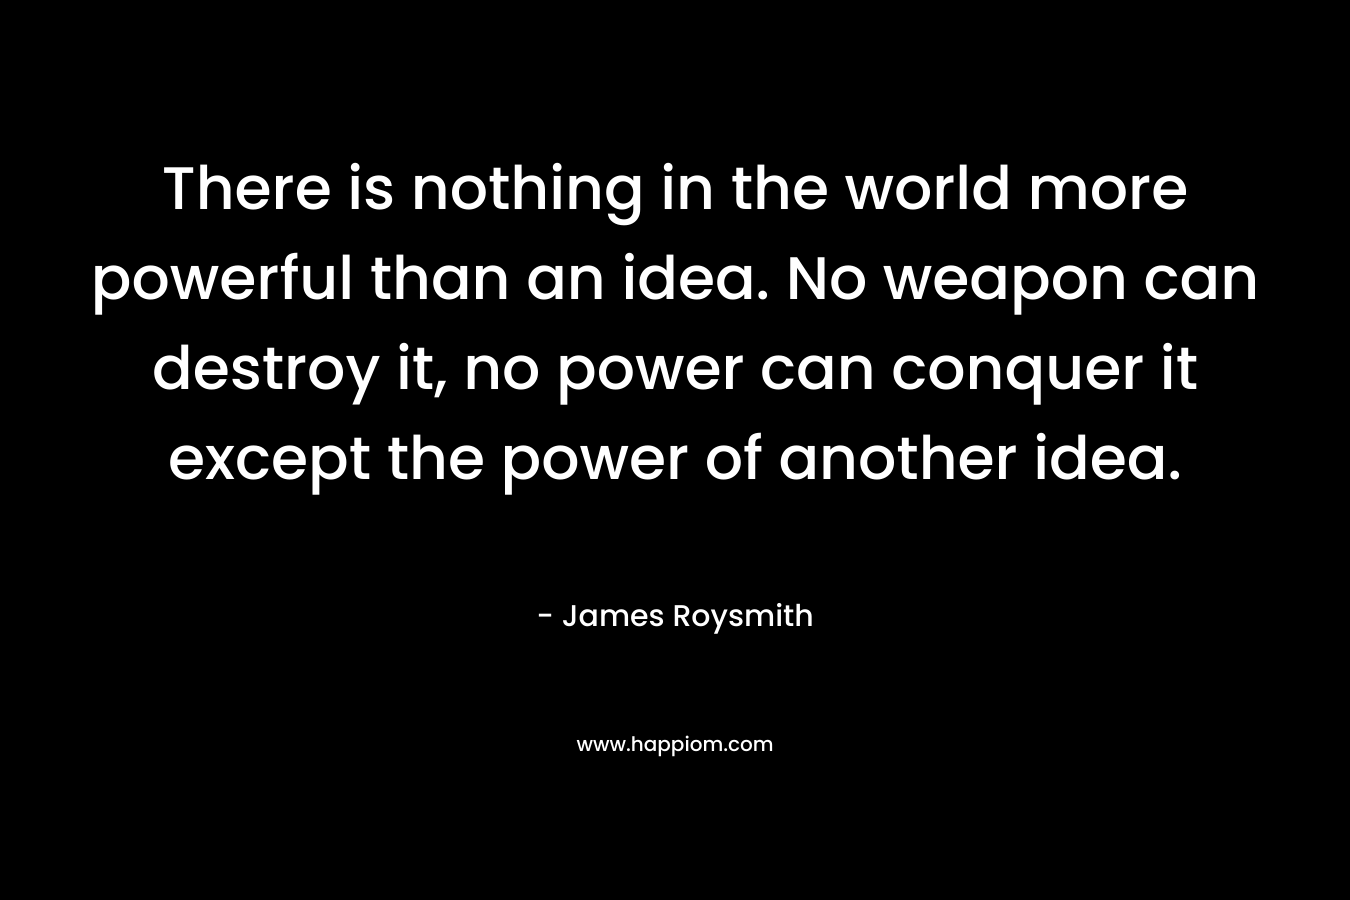 There is nothing in the world more powerful than an idea. No weapon can destroy it, no power can conquer it except the power of another idea.